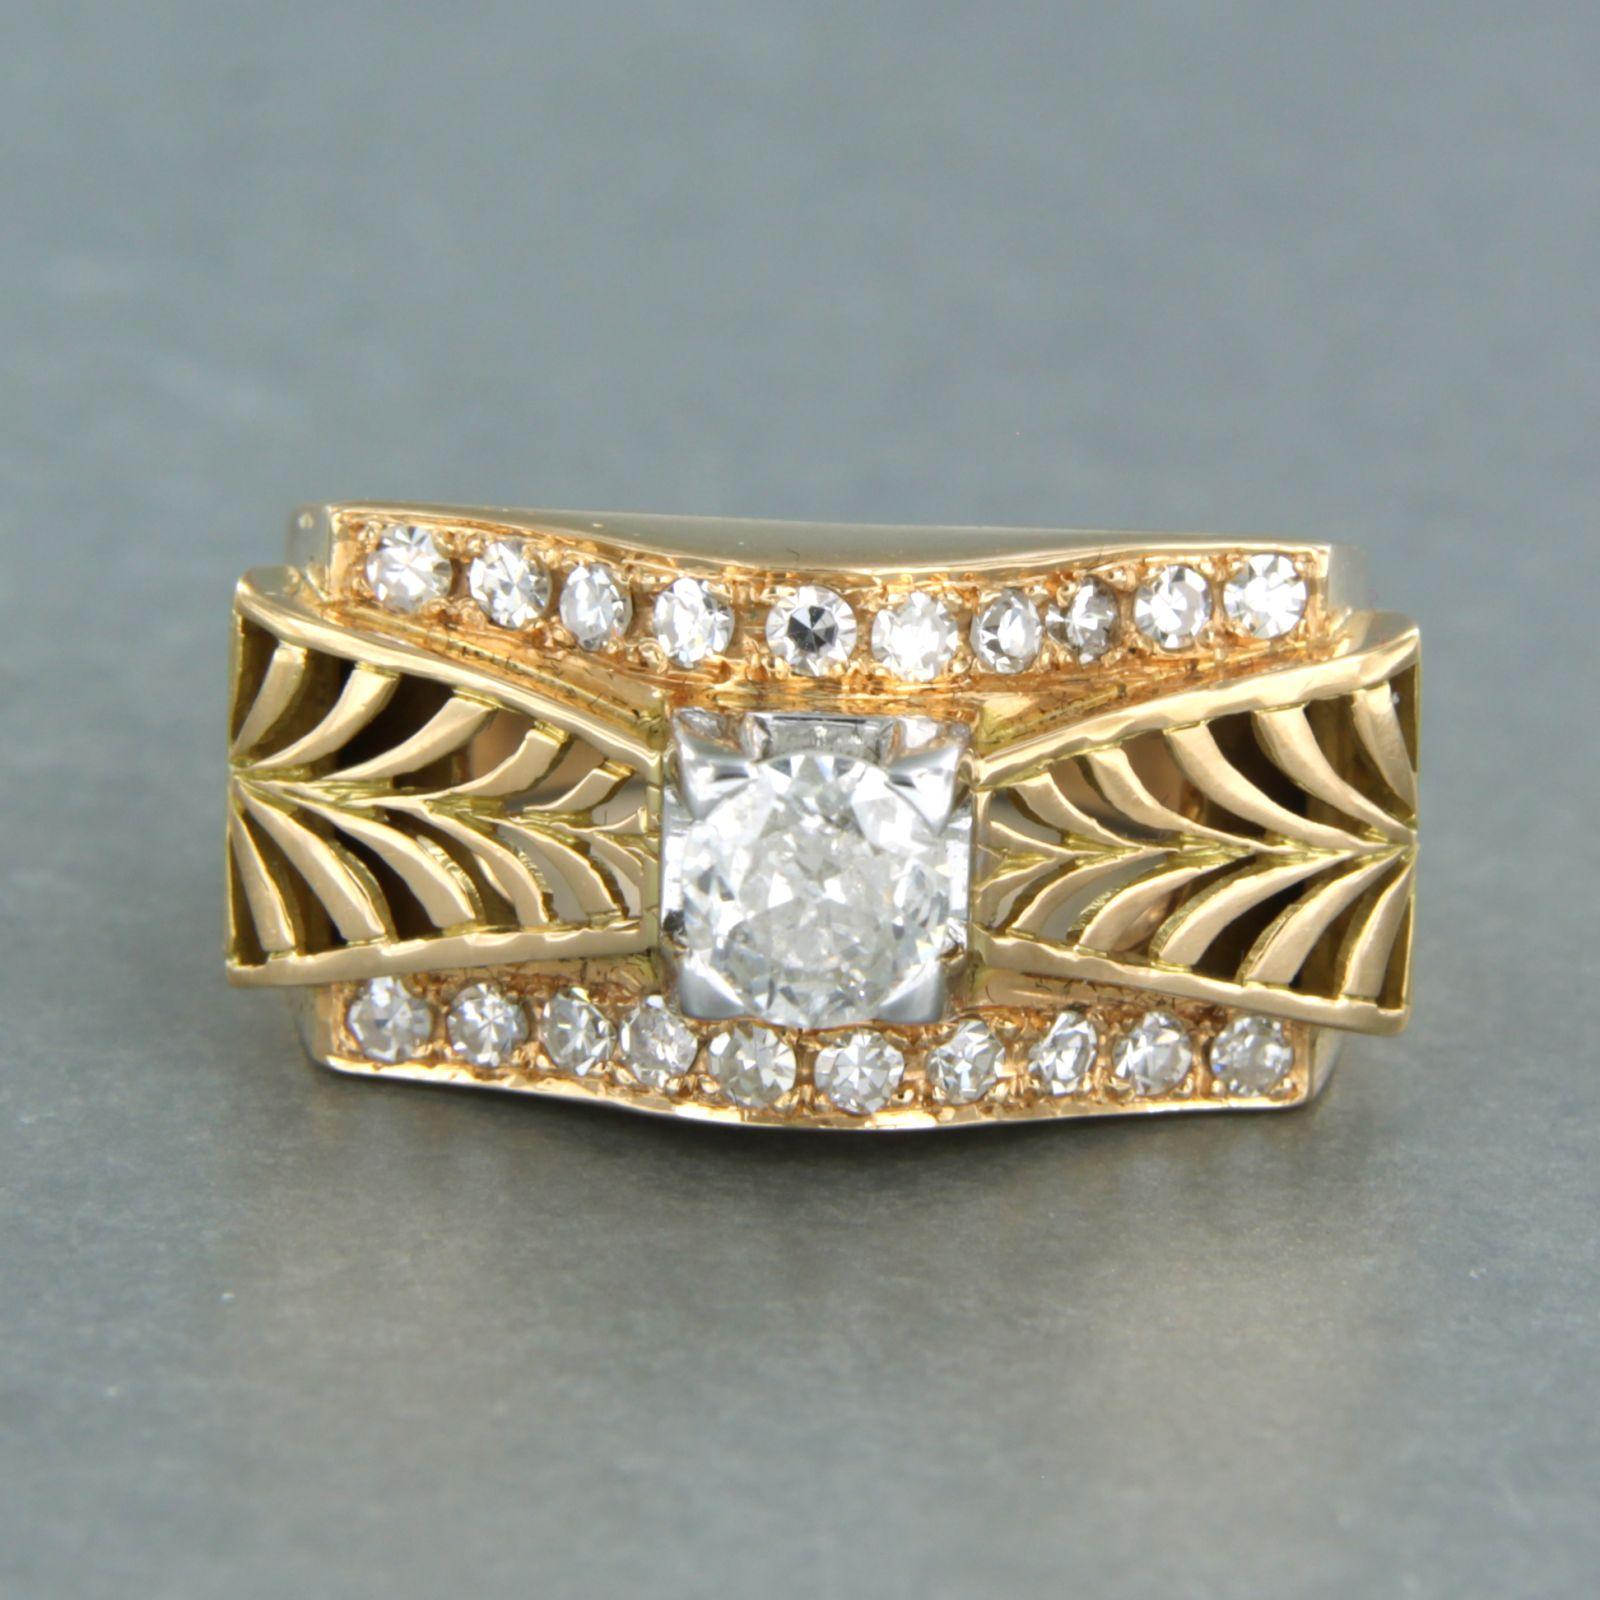 18k bicolor gold ring set with old mine cut and single cut diamonds. 0.90ct - F/G - Pique2, VS/SI - ring size U.S. 7.25 - EU. 17.5(55)

detailed description:

the top of the ring is 1.1 cm wide and 9.5 mm high

Ring size US 7.25 - EU. 17.5(55), can